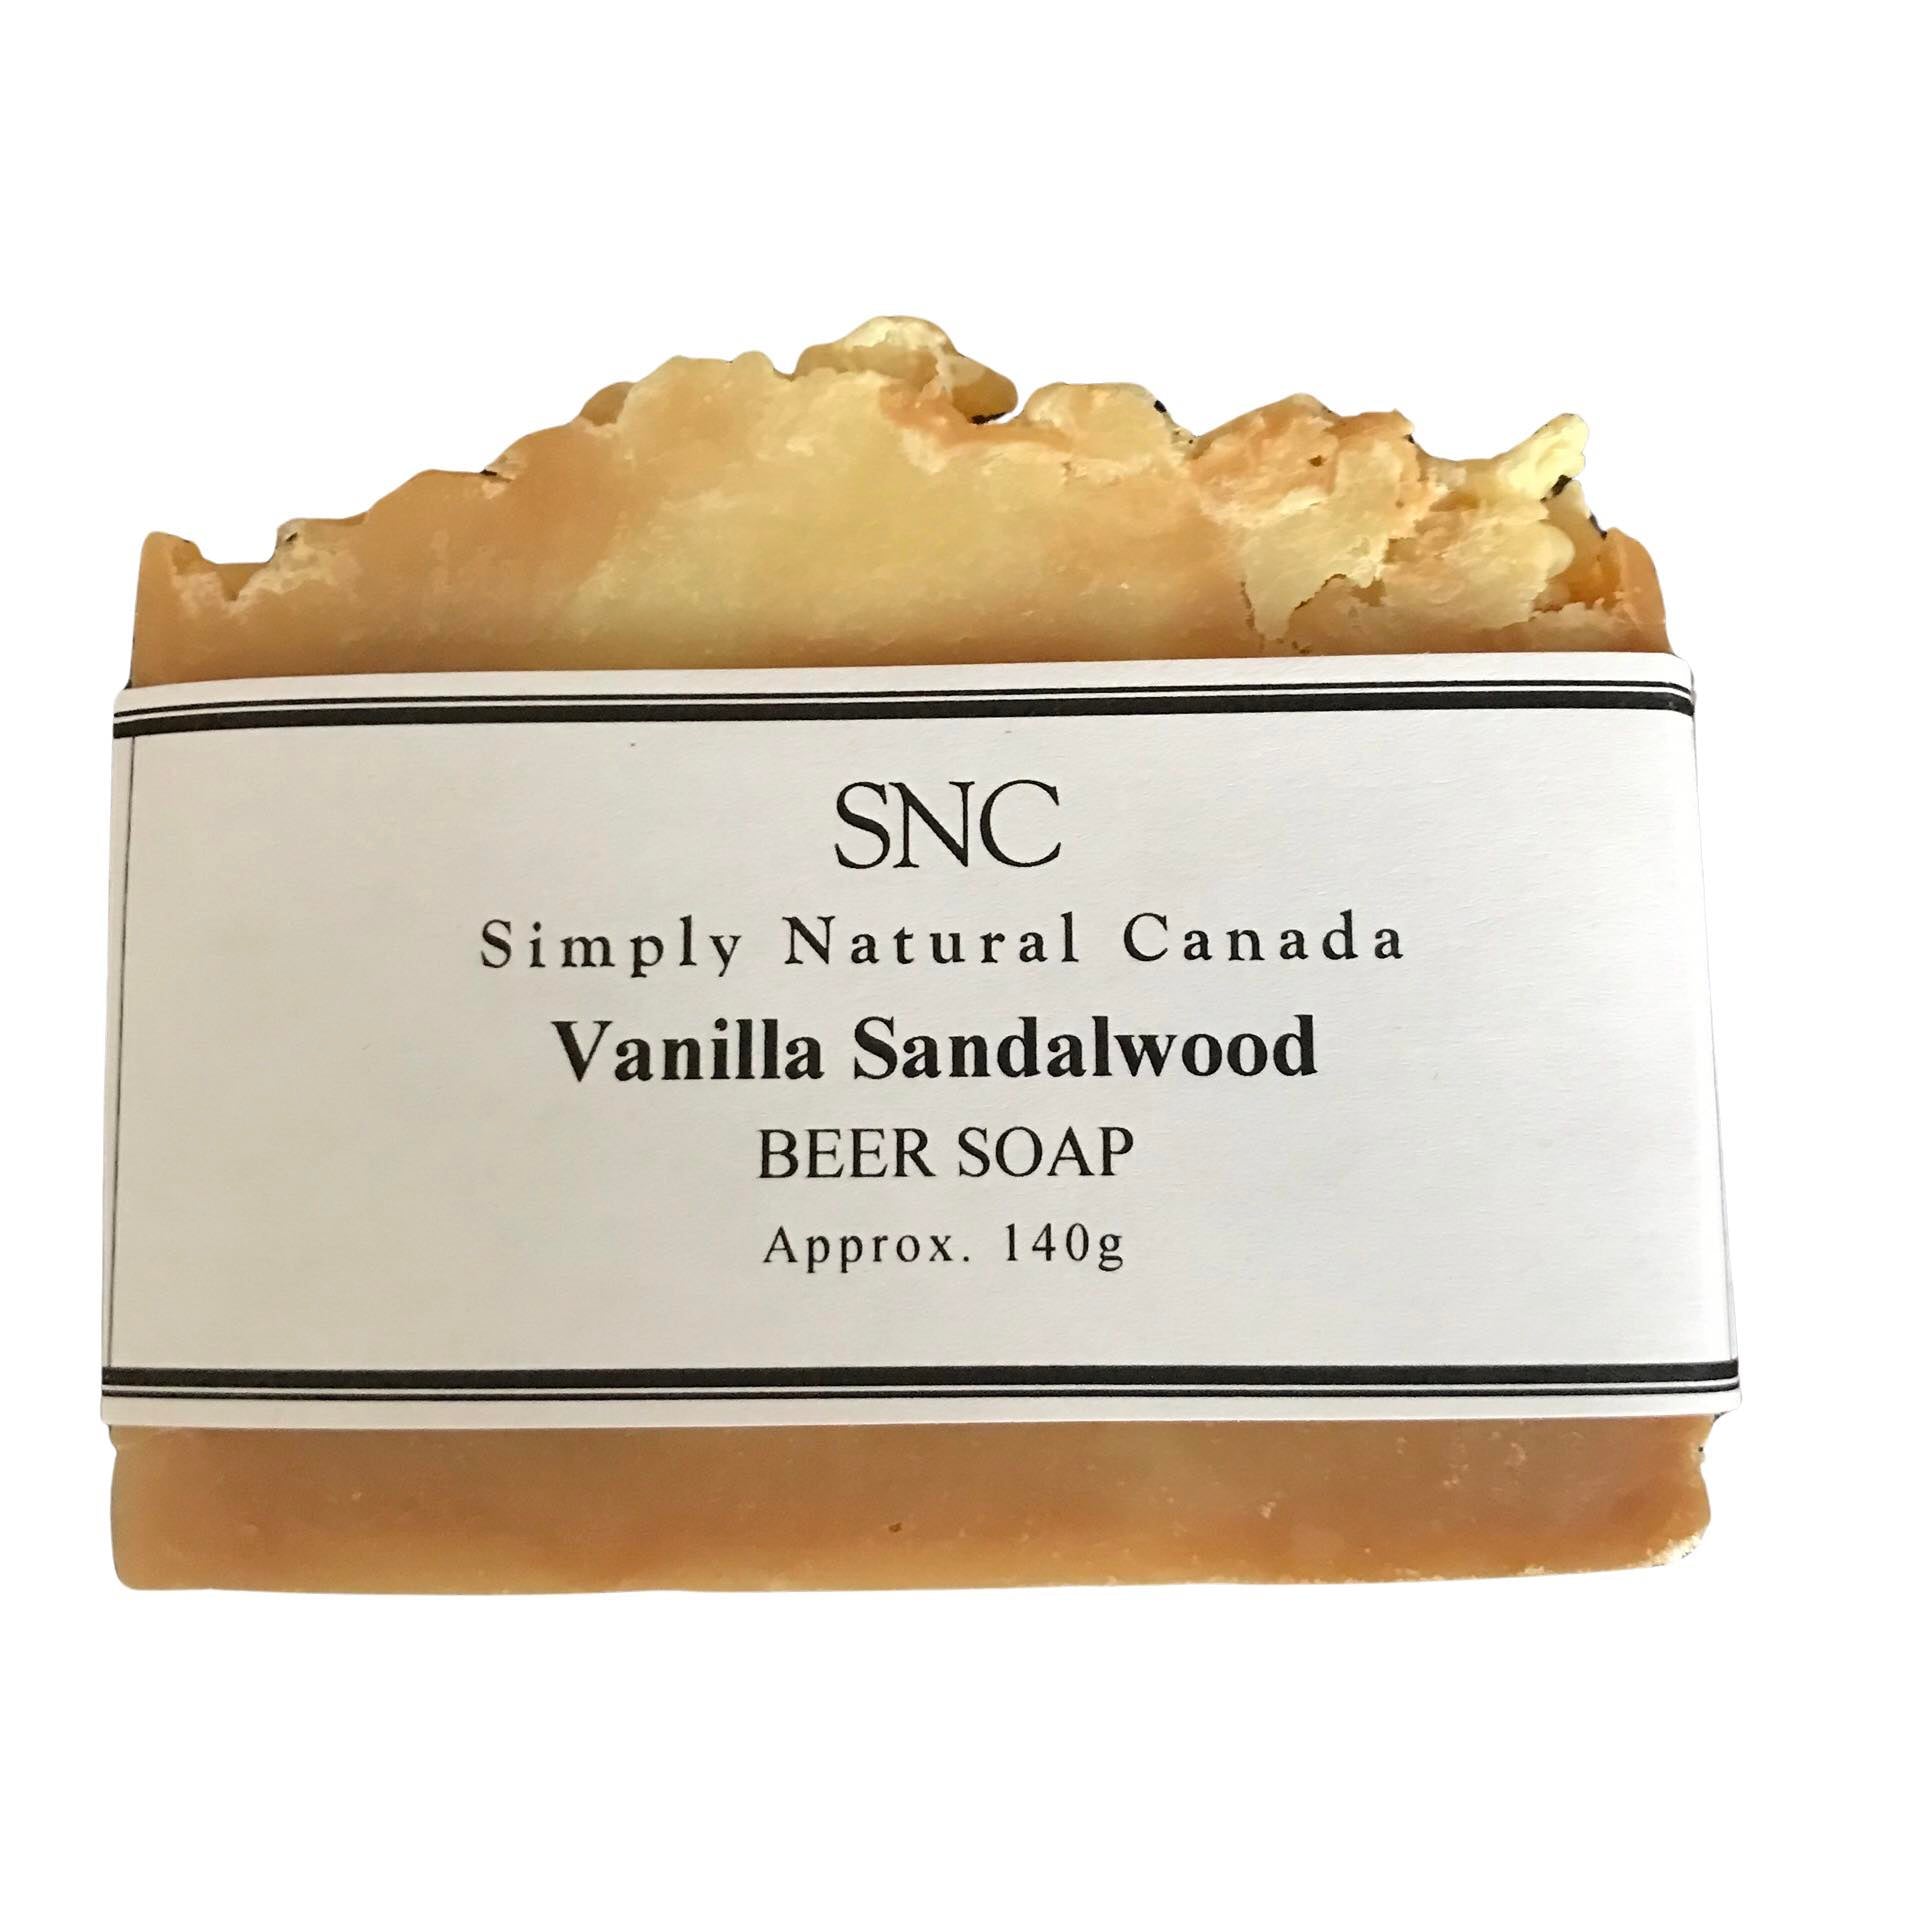 Vanilla sandalwood rectangle beer soap handcrafted in Canada with local craft beer by Simply Natural Canada